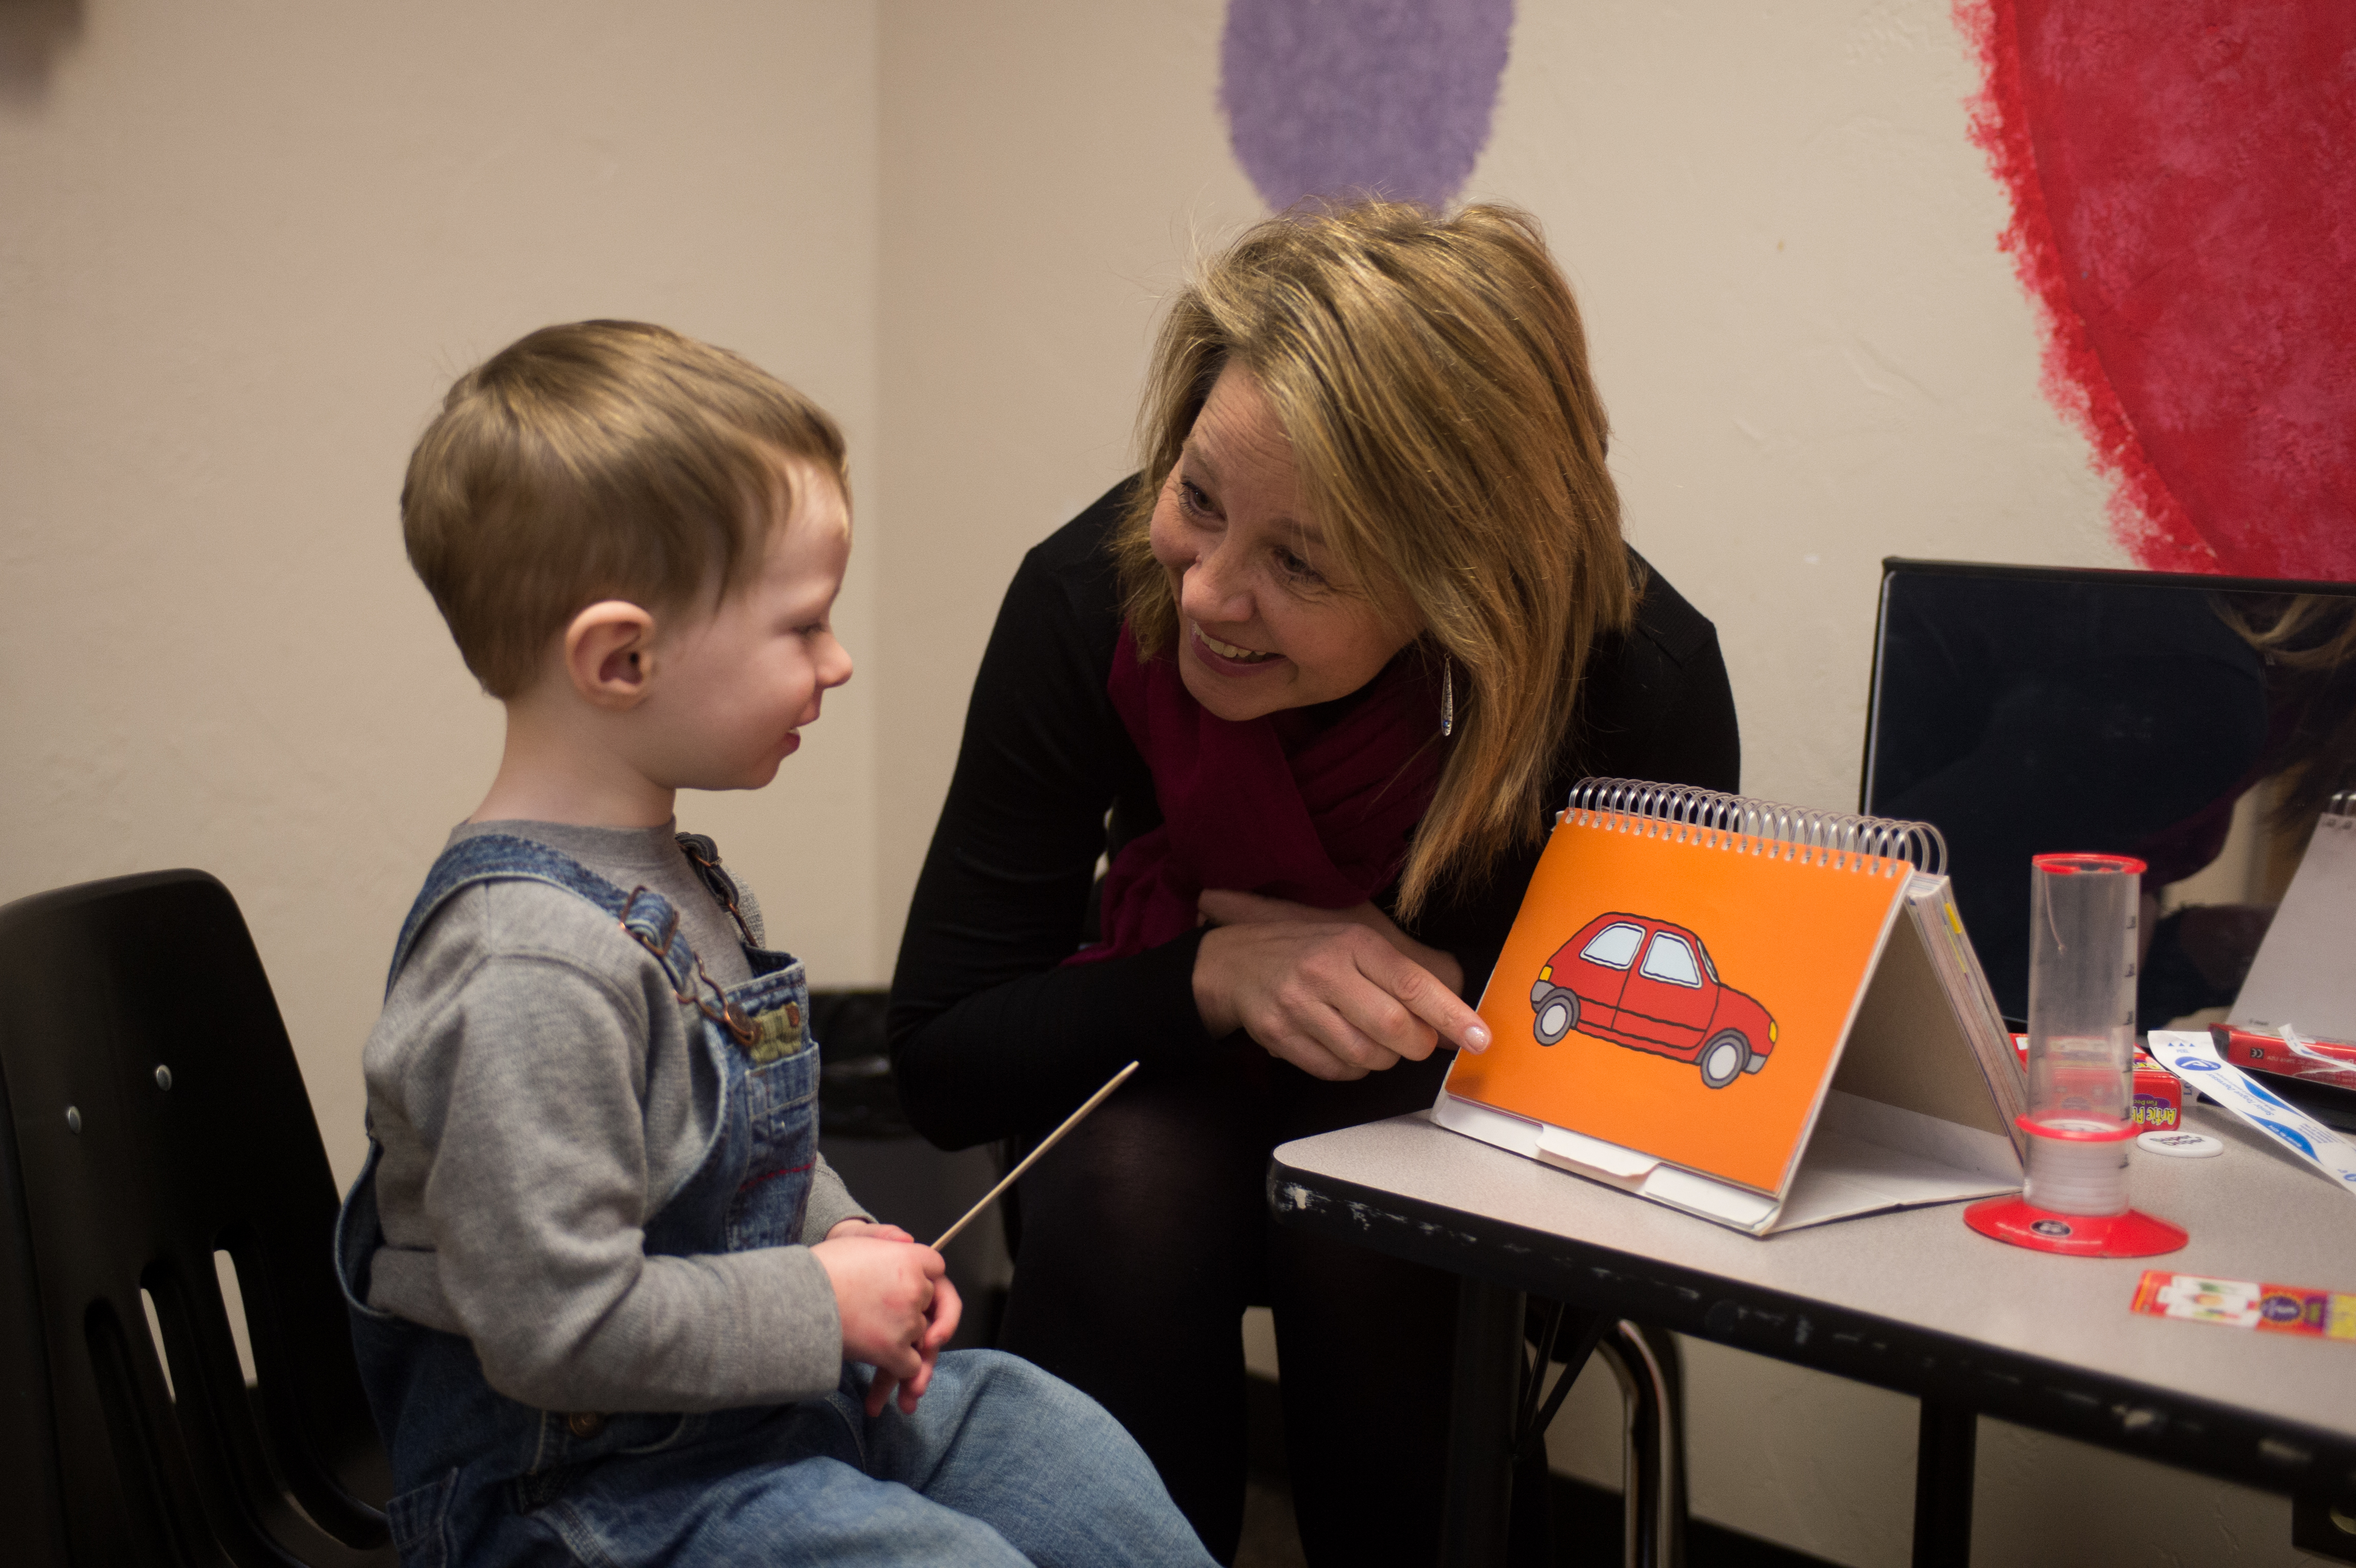 Small child works with a speech language pathologist to recognize an image of a car